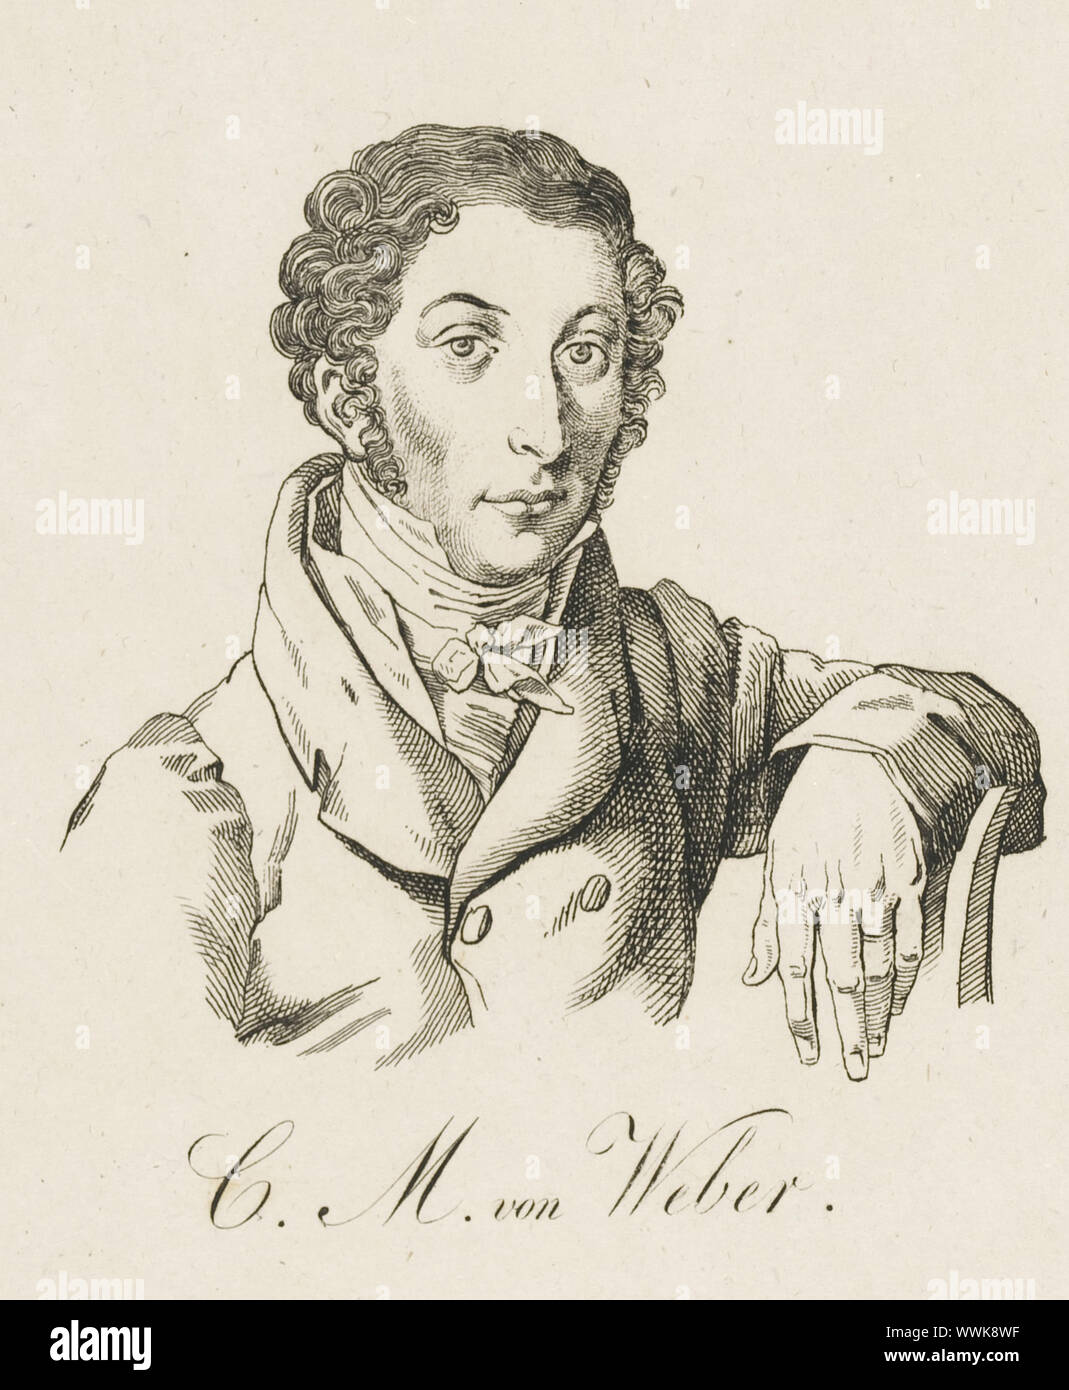 Carl Maria von Weber (1786-1826), after 1821. Private Collection. Stock Photo